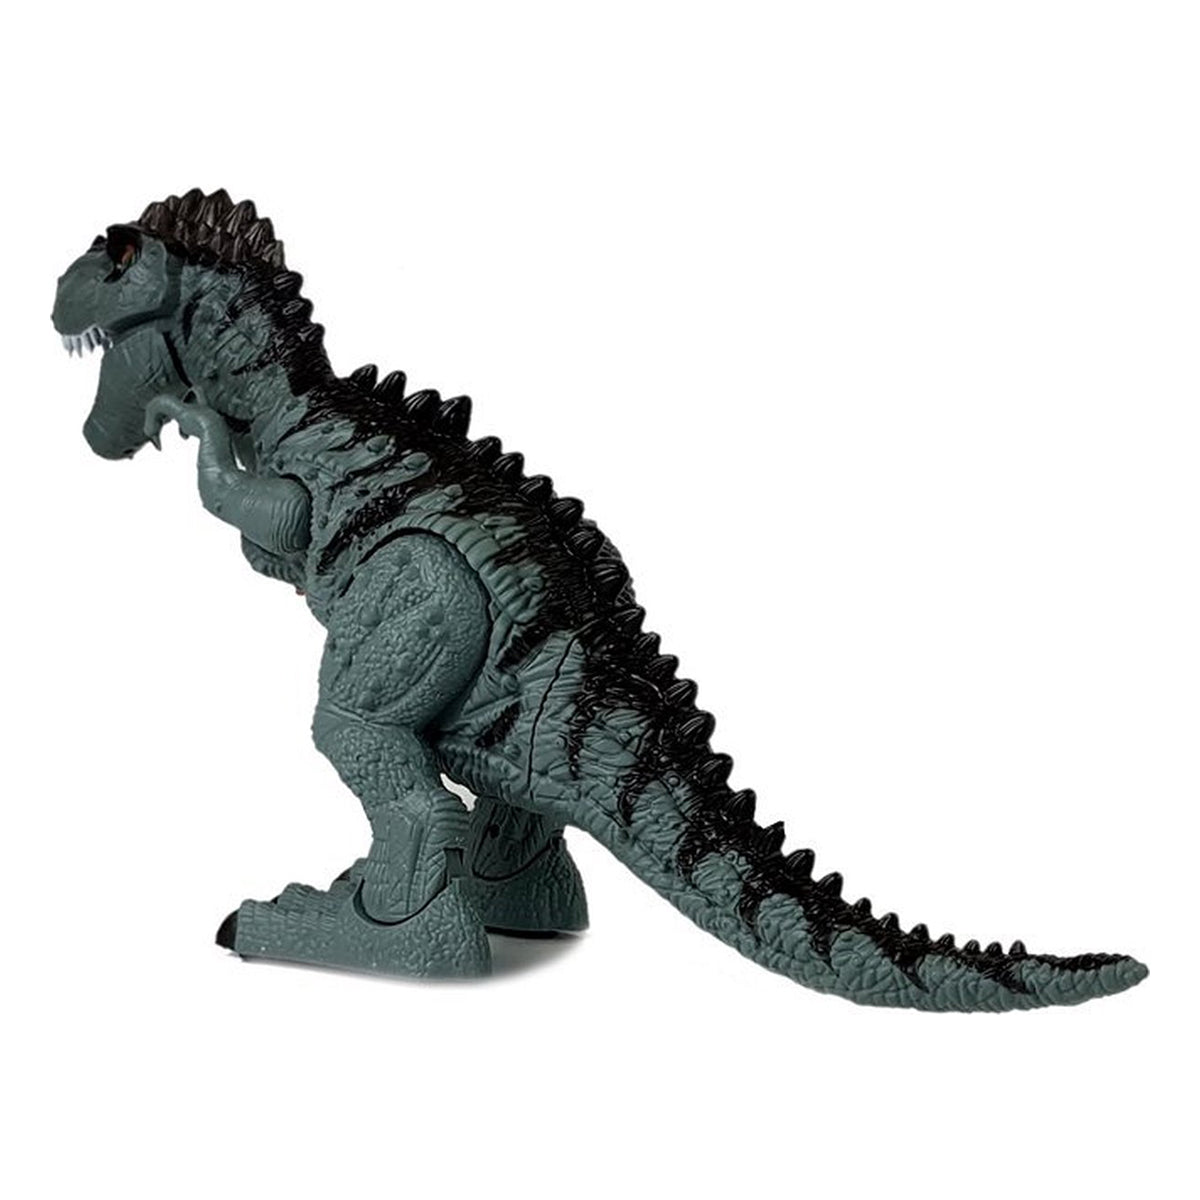 <tc>Ariko</tc>  RC Dinosaur - Dino - Lays Eggs - Light projection - with Light and Sound - 6 small eggs - Movable parts - Including batteries